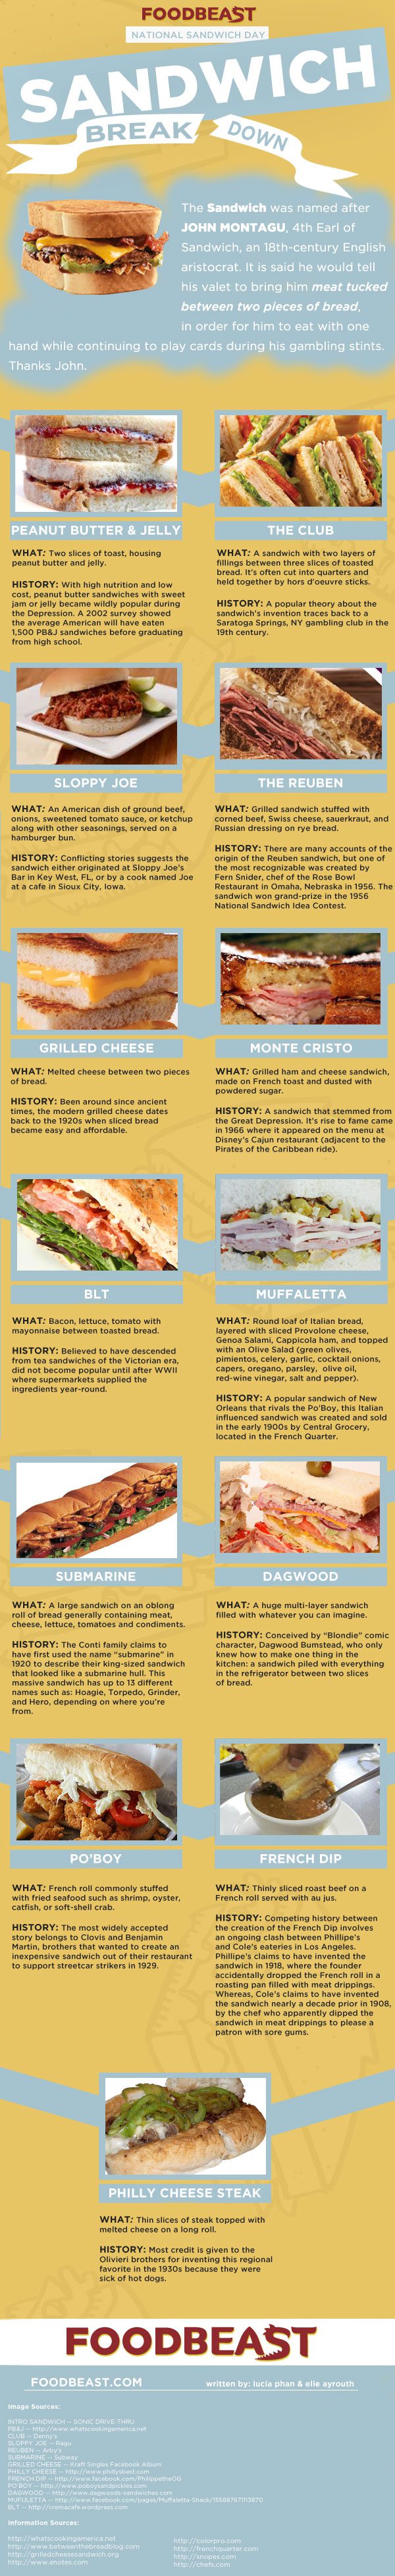 Who Invented the Reuben Sandwich